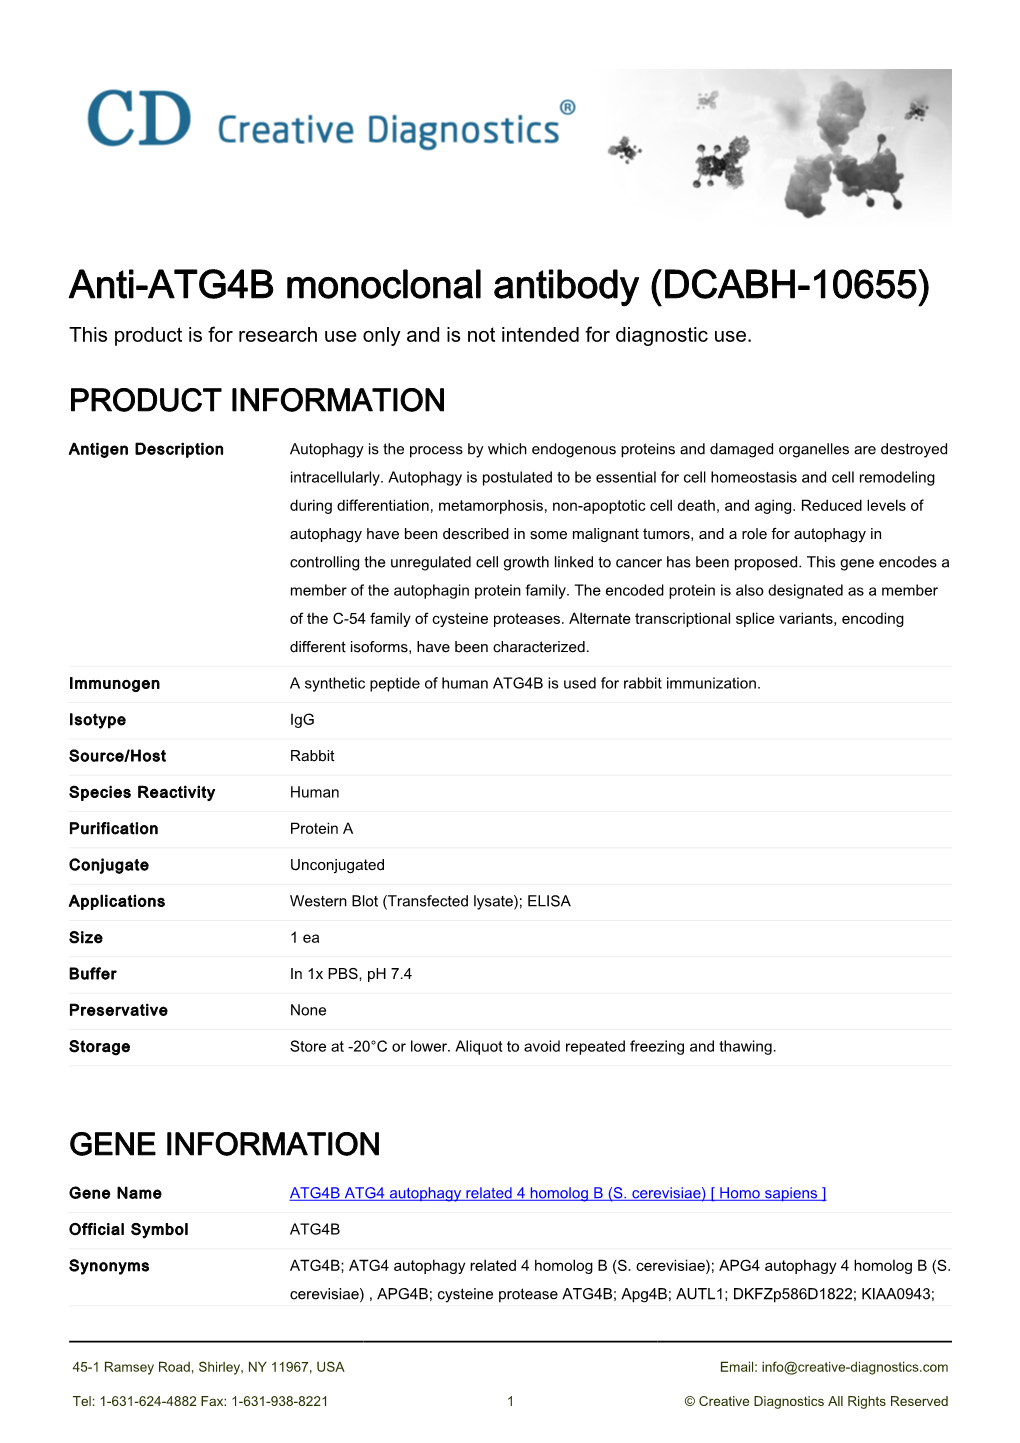 Anti-ATG4B Monoclonal Antibody (DCABH-10655) This Product Is for Research Use Only and Is Not Intended for Diagnostic Use